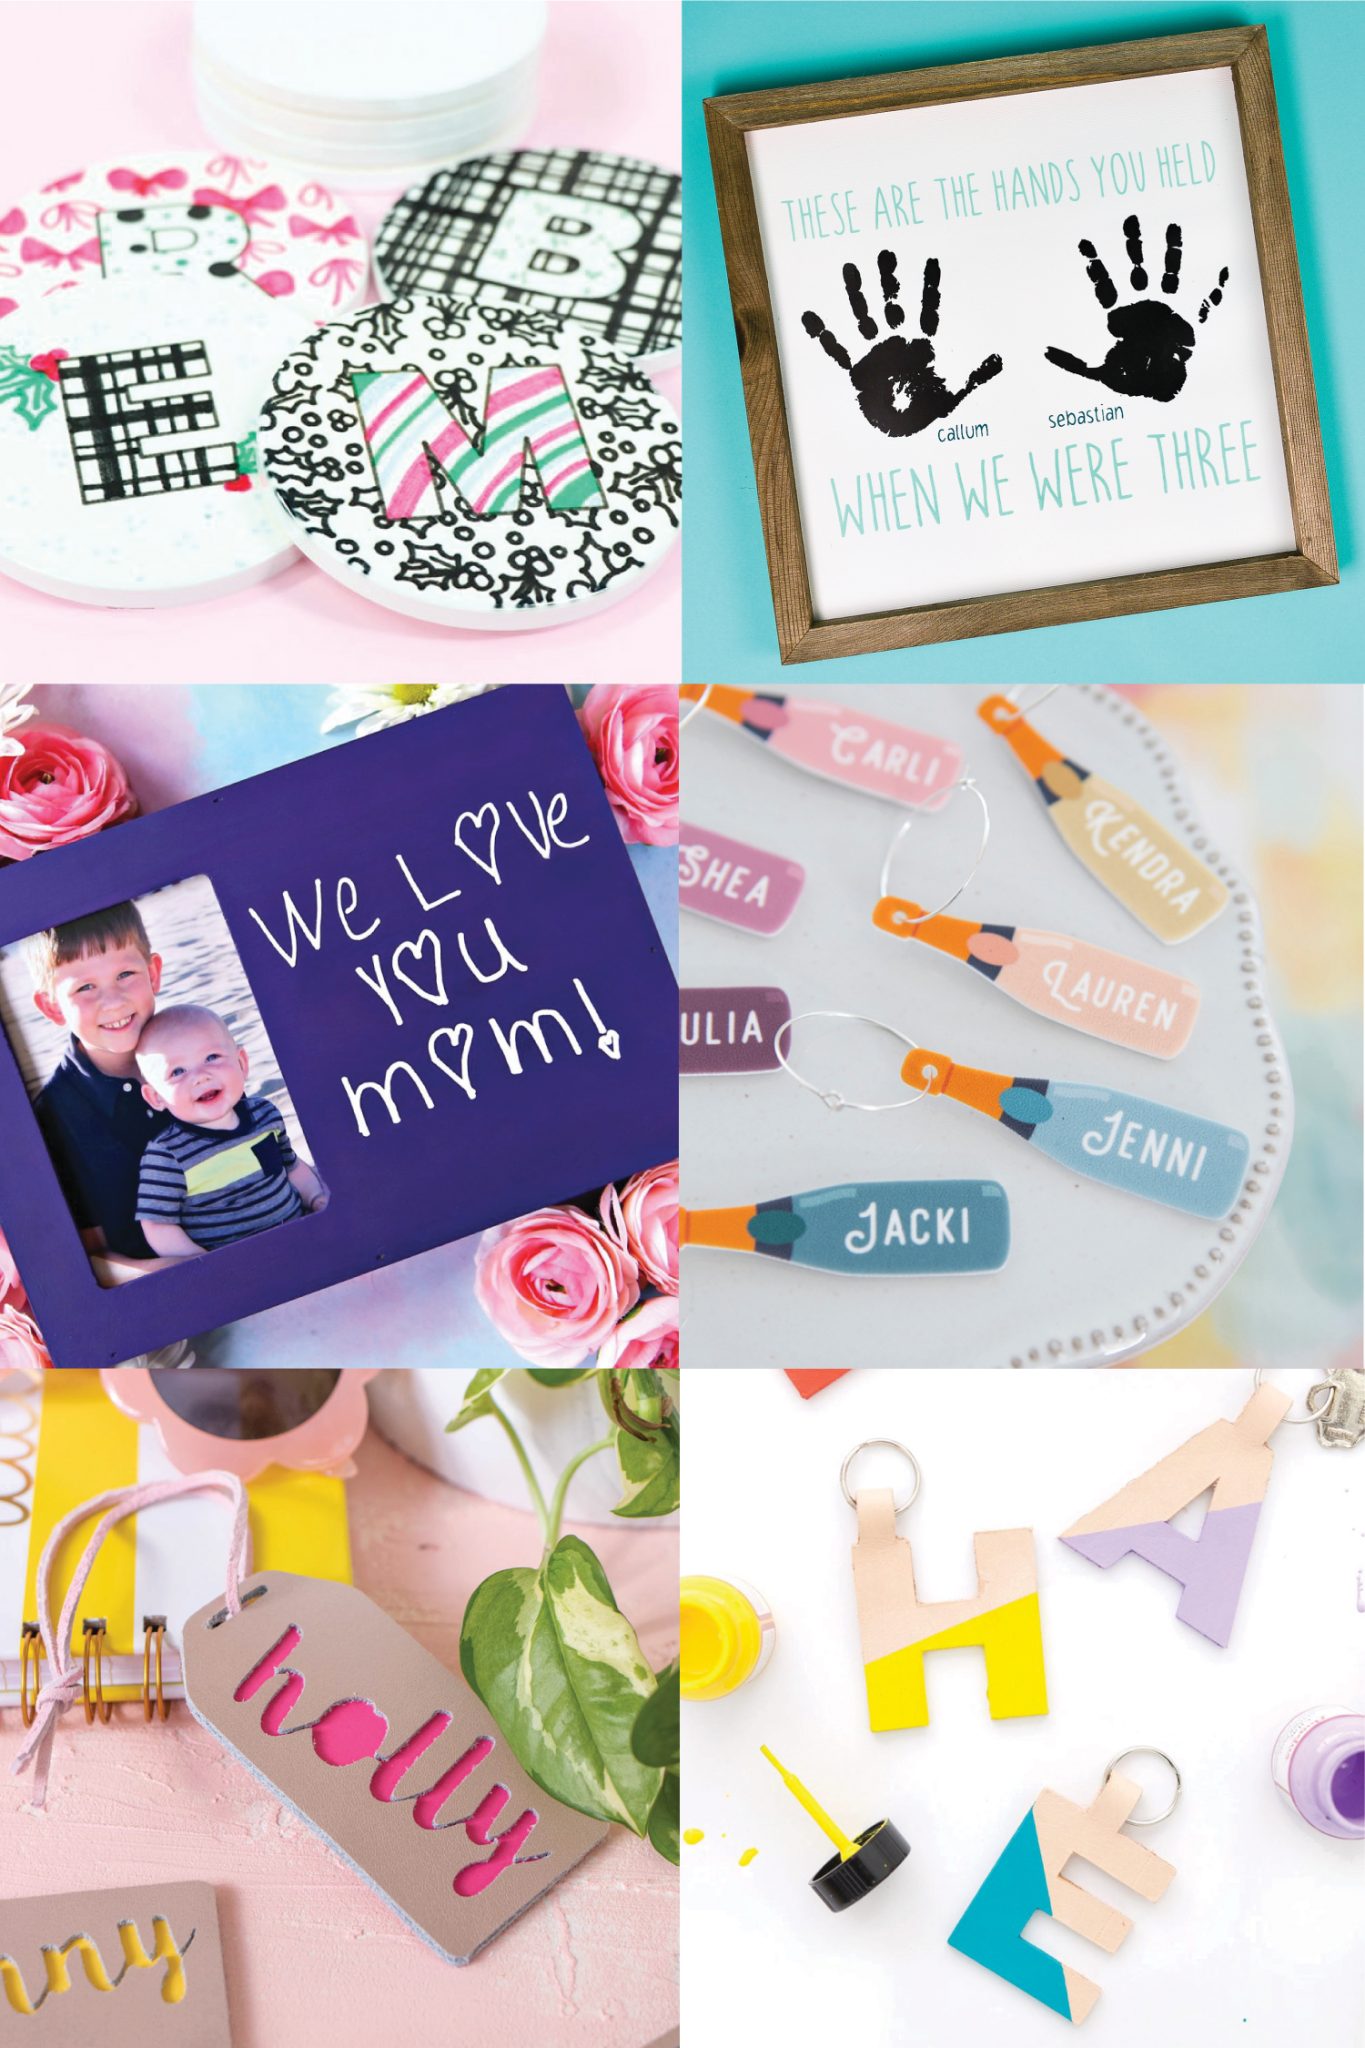 Personalized Gifts Made with Cricut